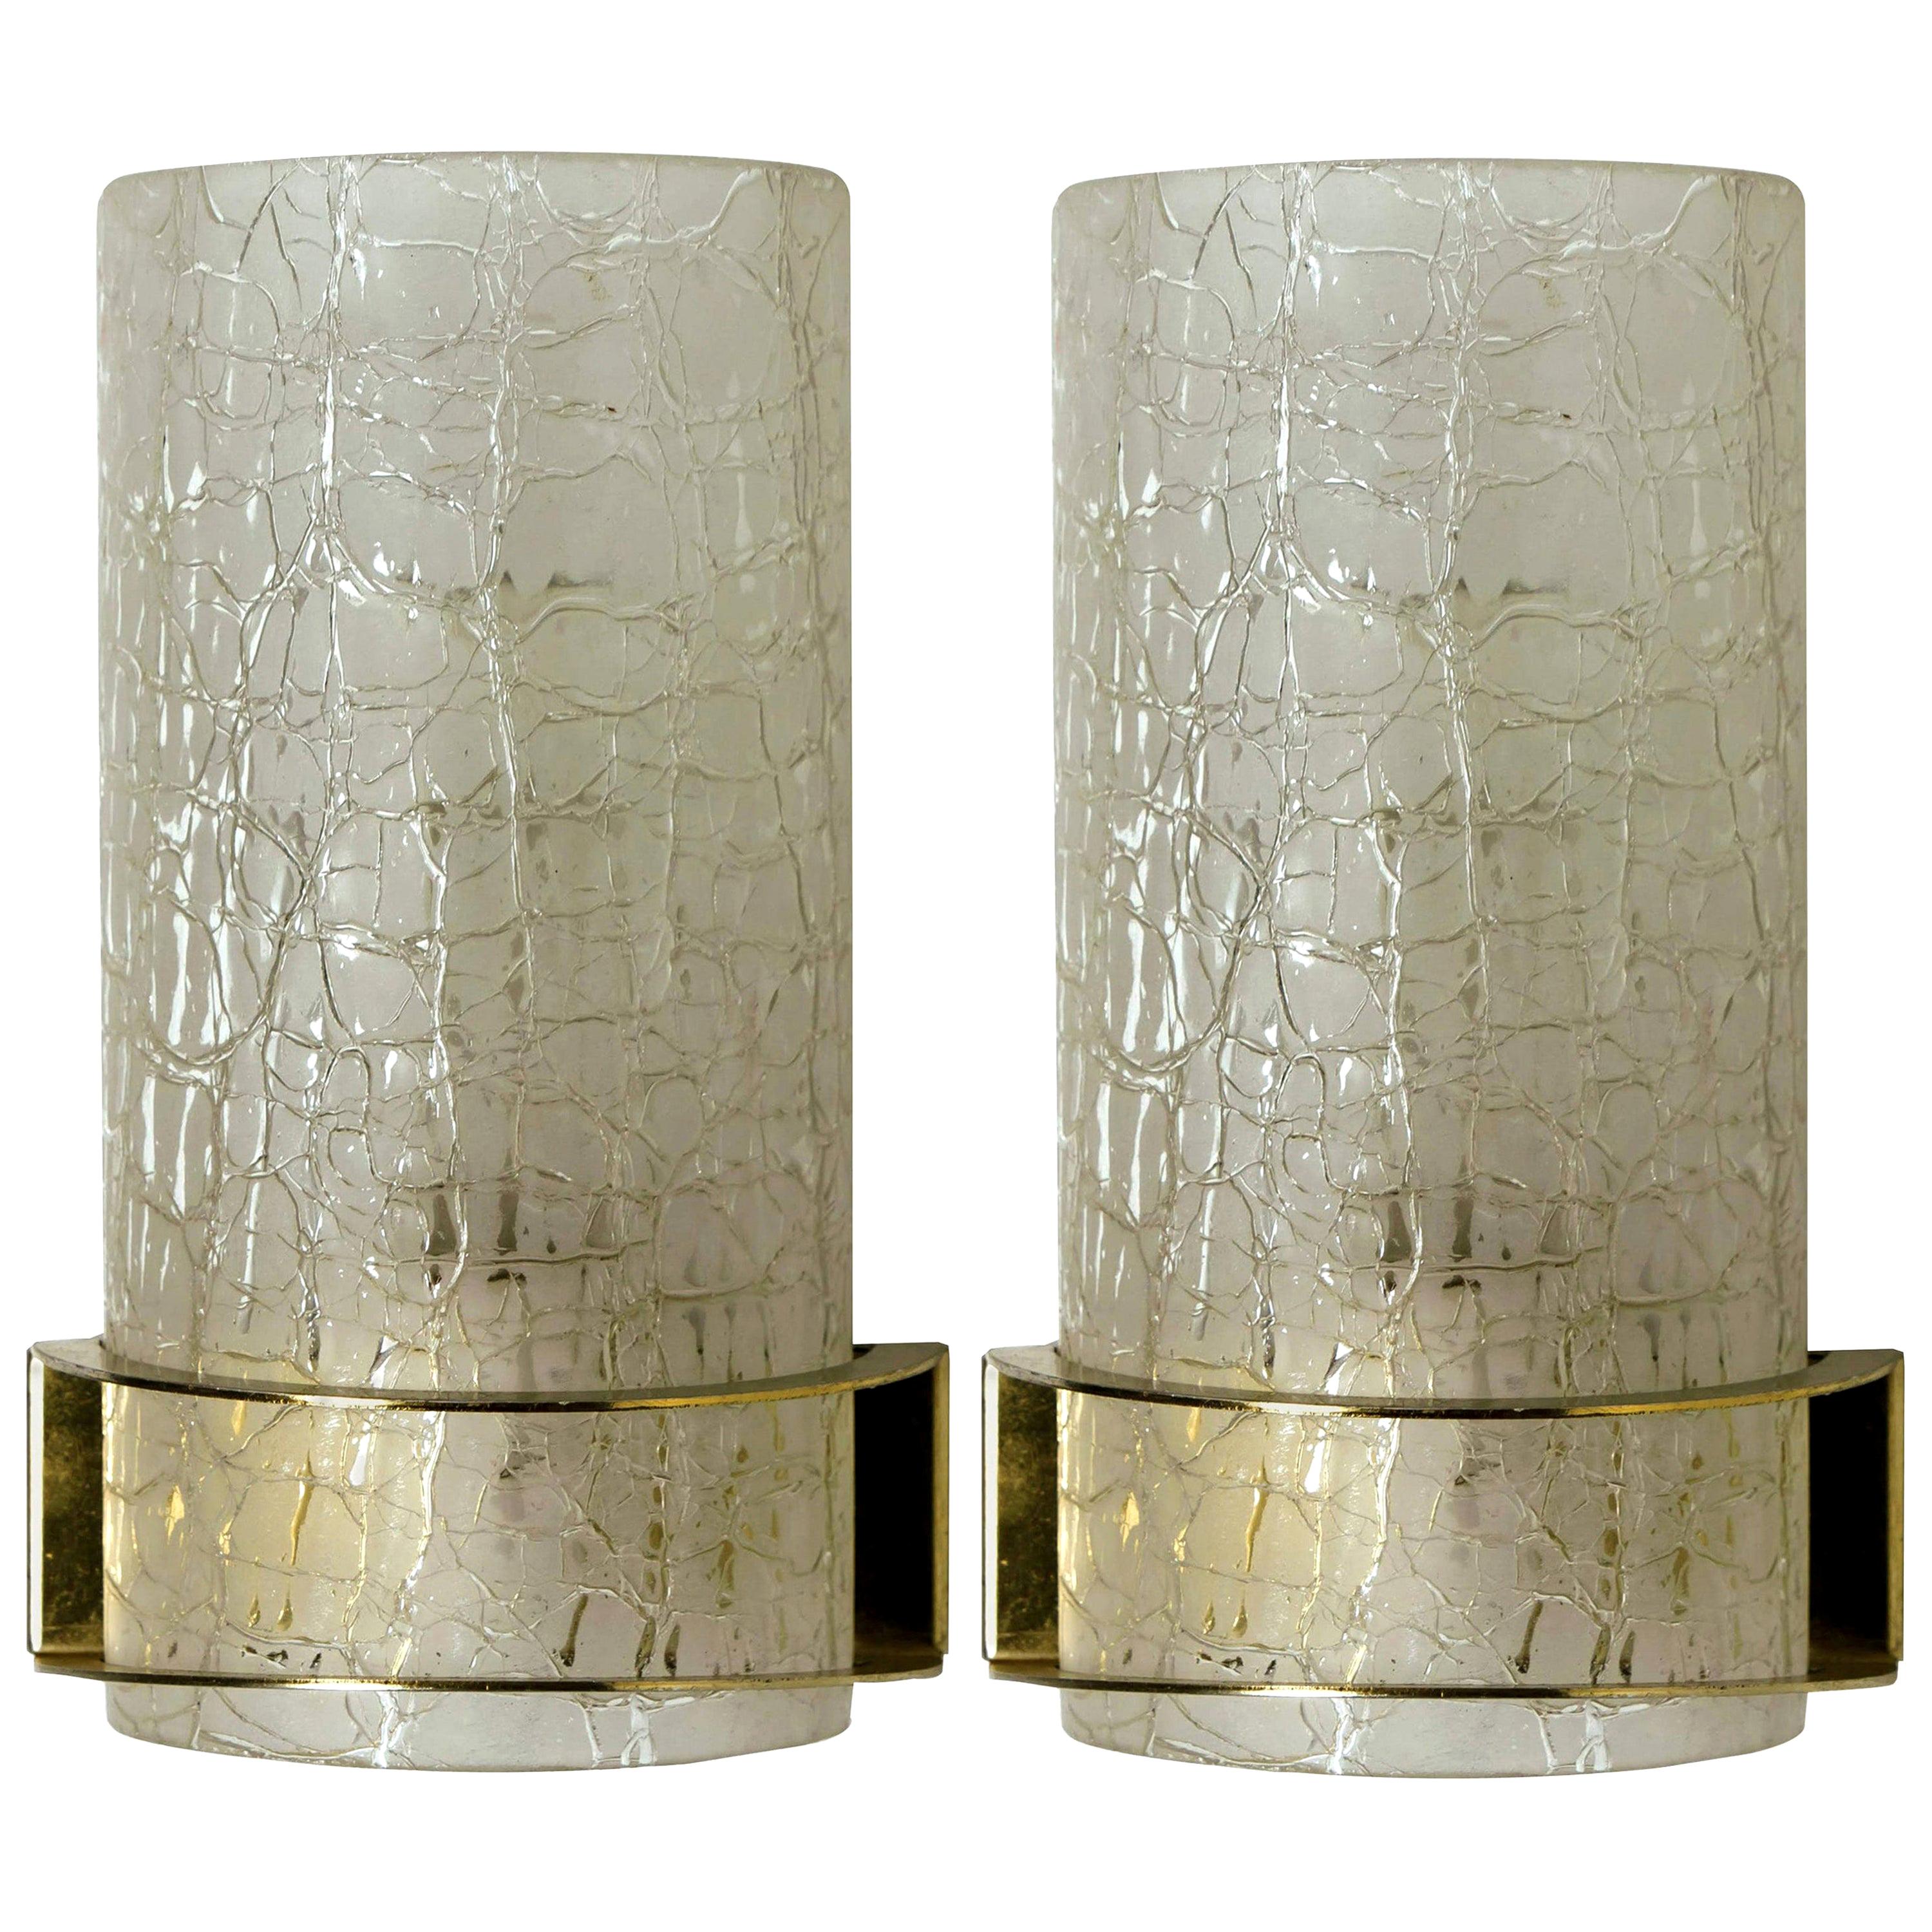 Pair of Hillebrand Massive Crackle Glass Wall Light Fixtures, 1960 For Sale